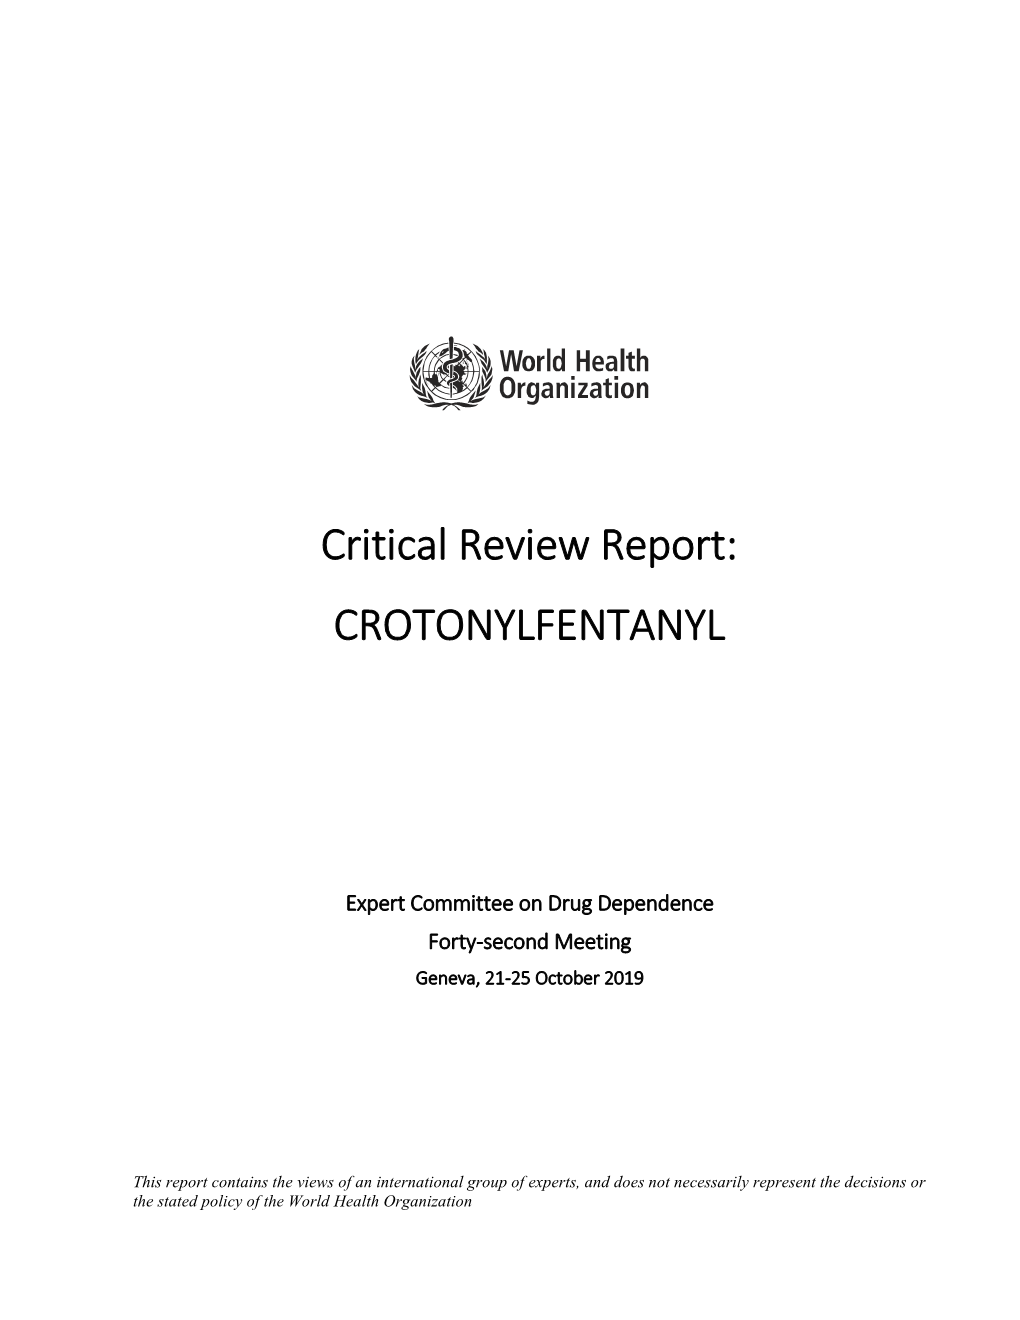 Critical Review Report: CROTONYLFENTANYL